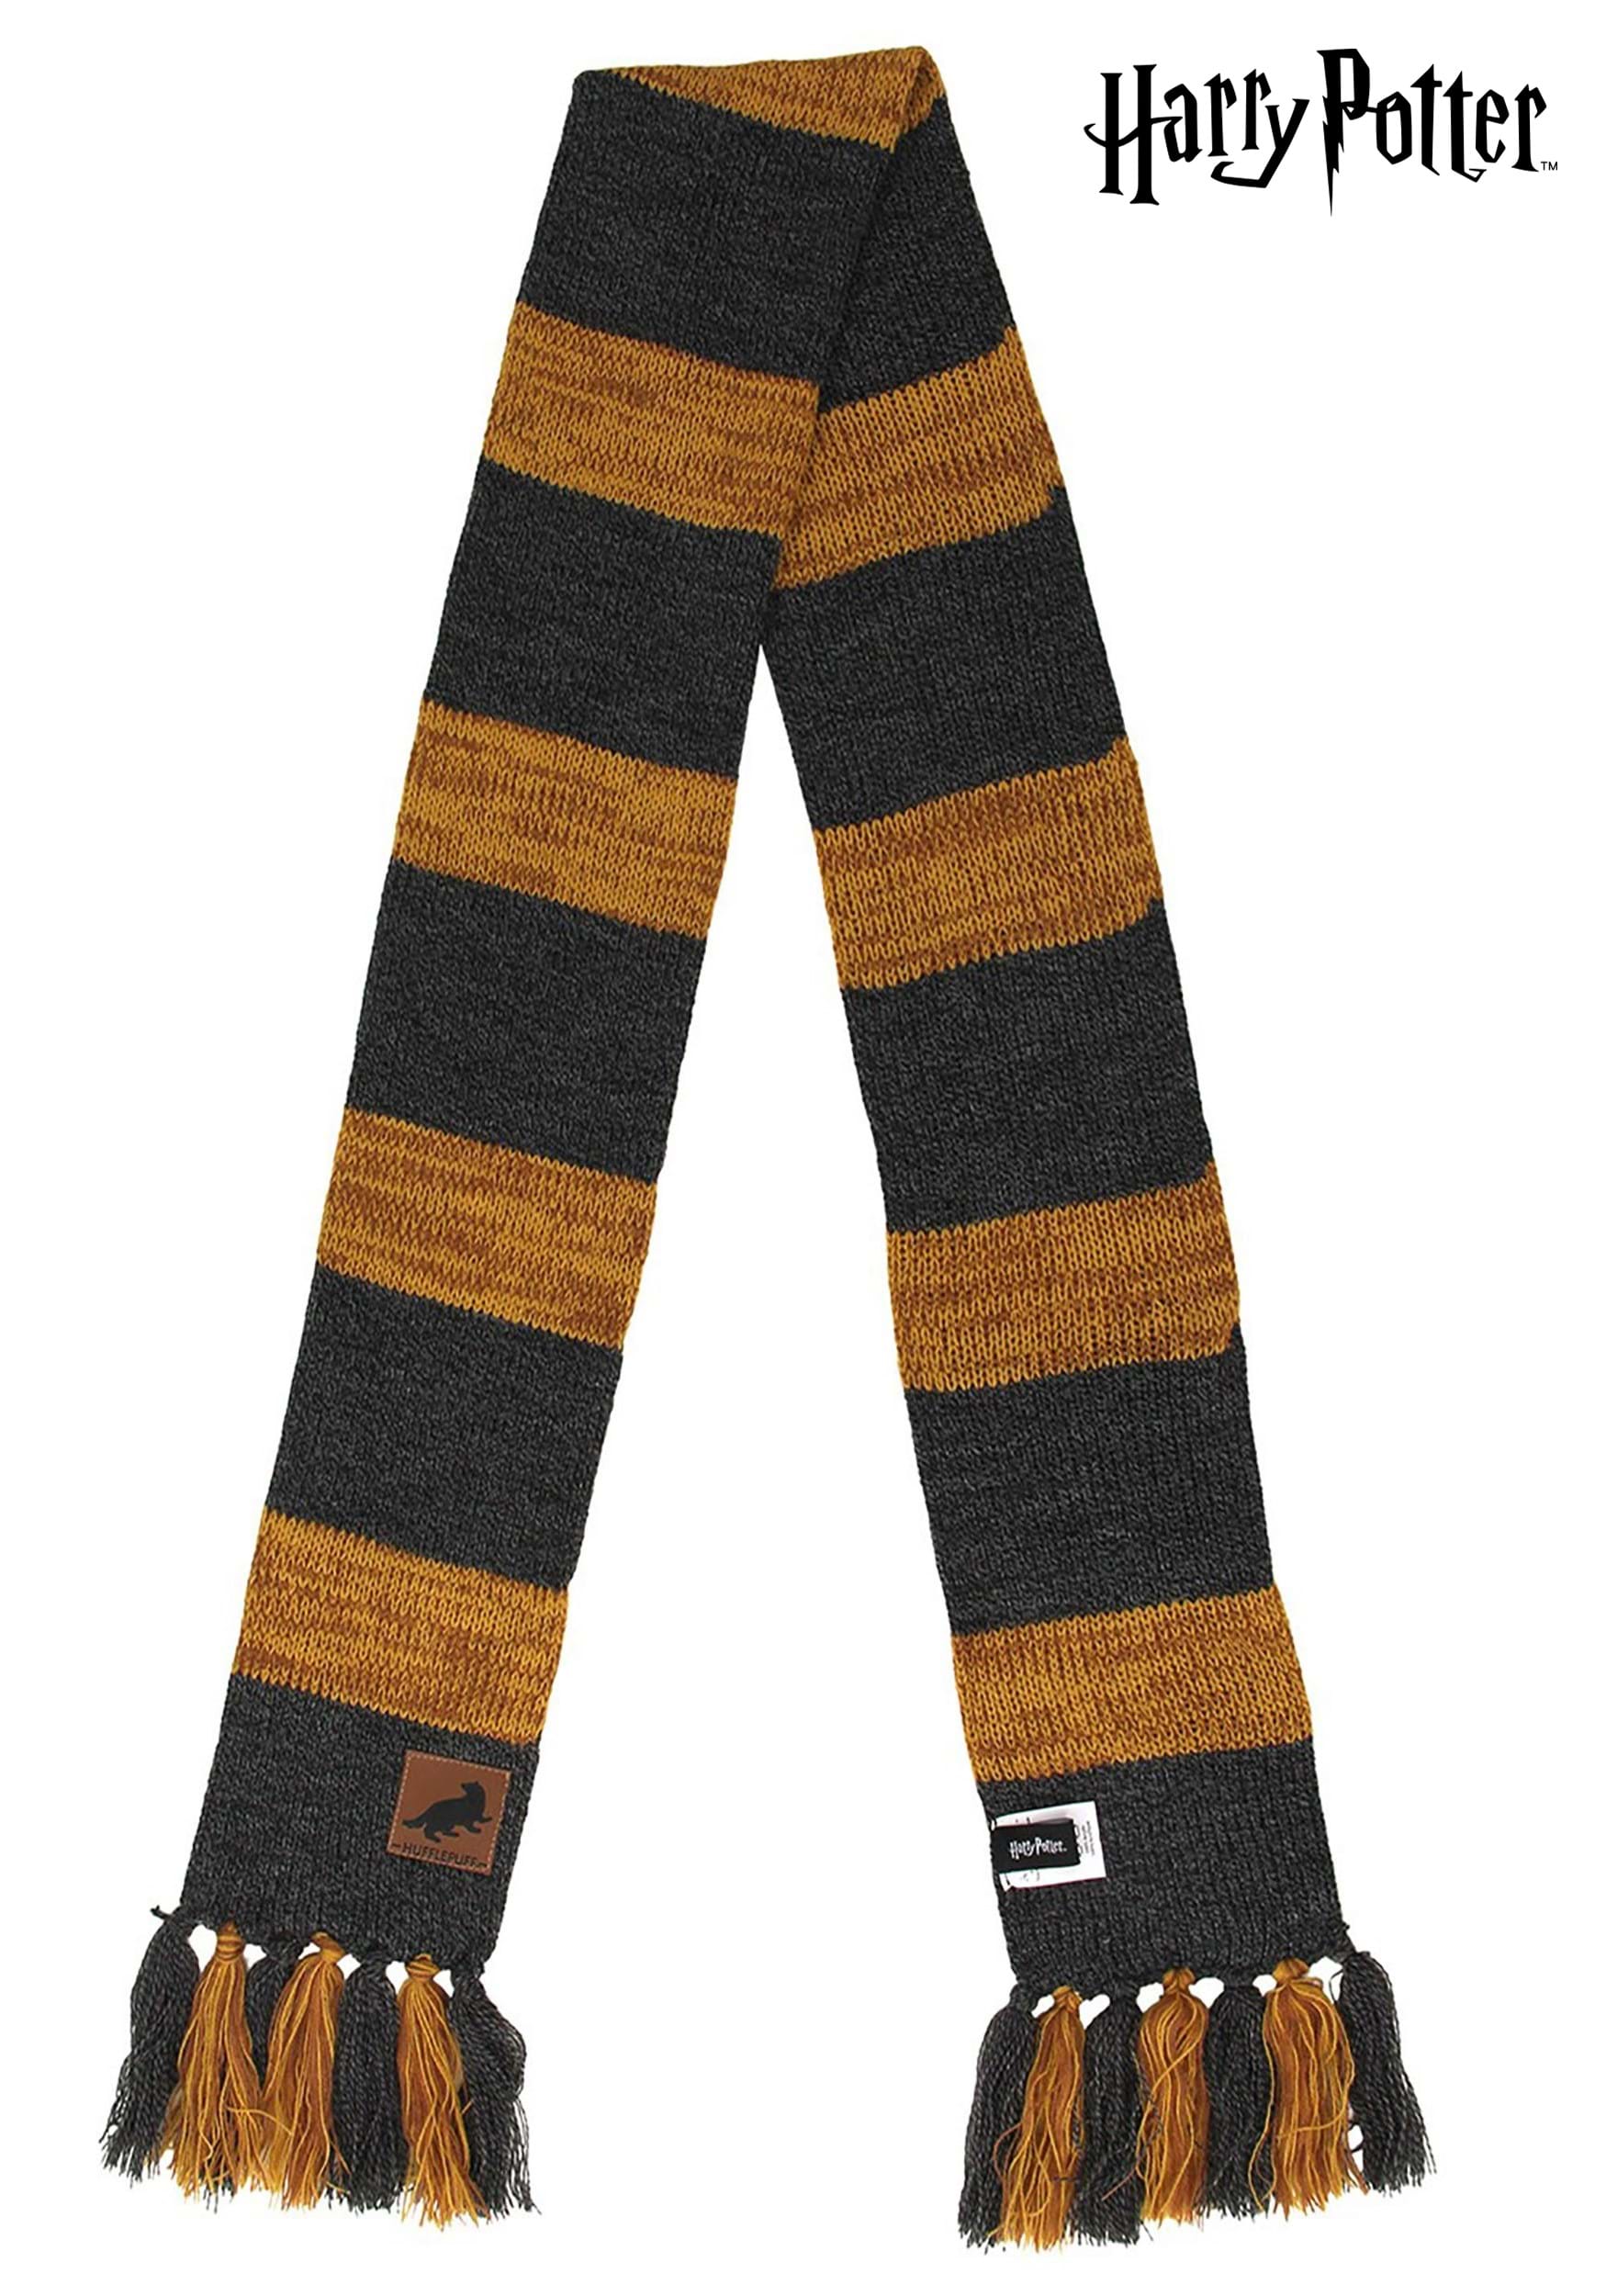 Official Harry Potter Hogwarts Extra Wide Acrylic Scarf With Embroidered Crest 